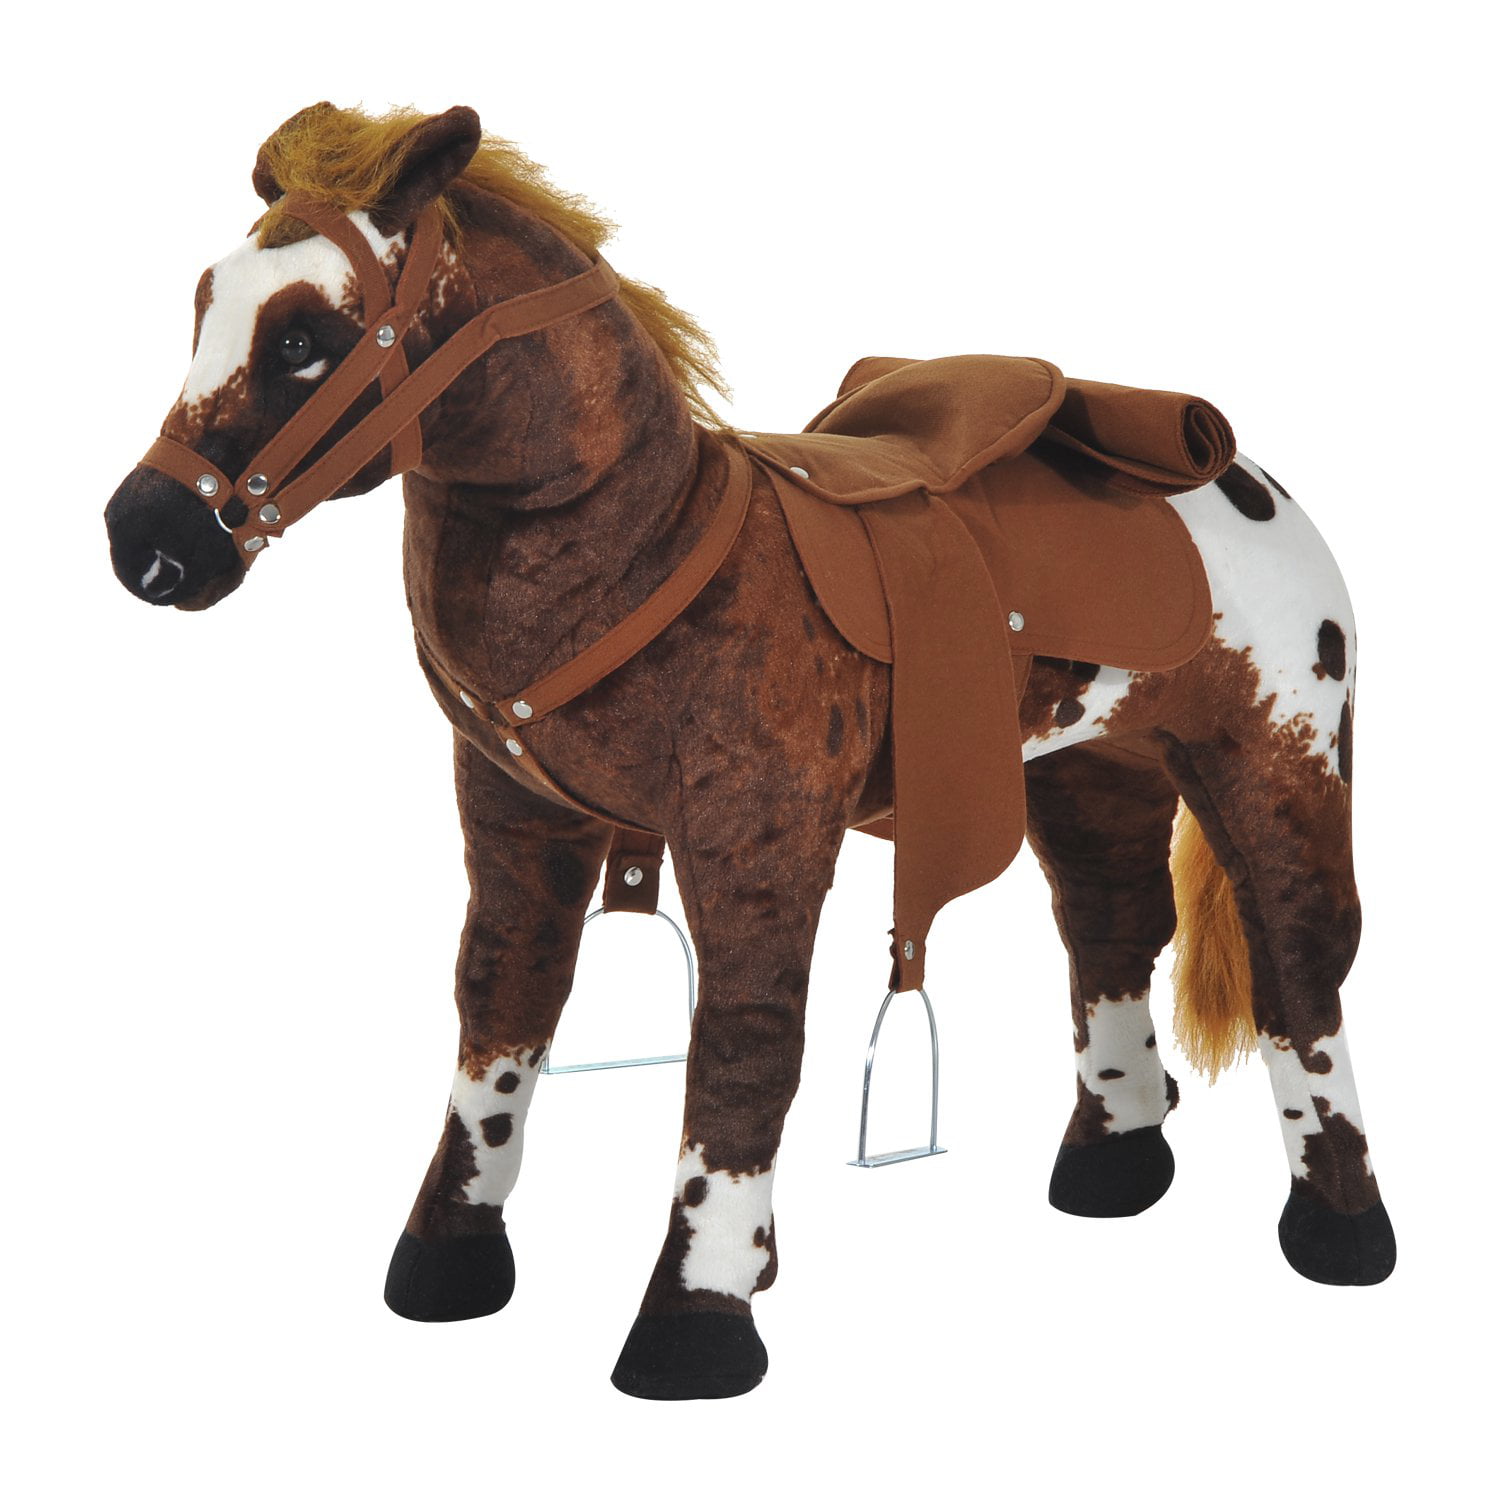 DARK BROWN REMOTE CONTROL WALKING HORSE WITH SOUND battery operated toy pony 